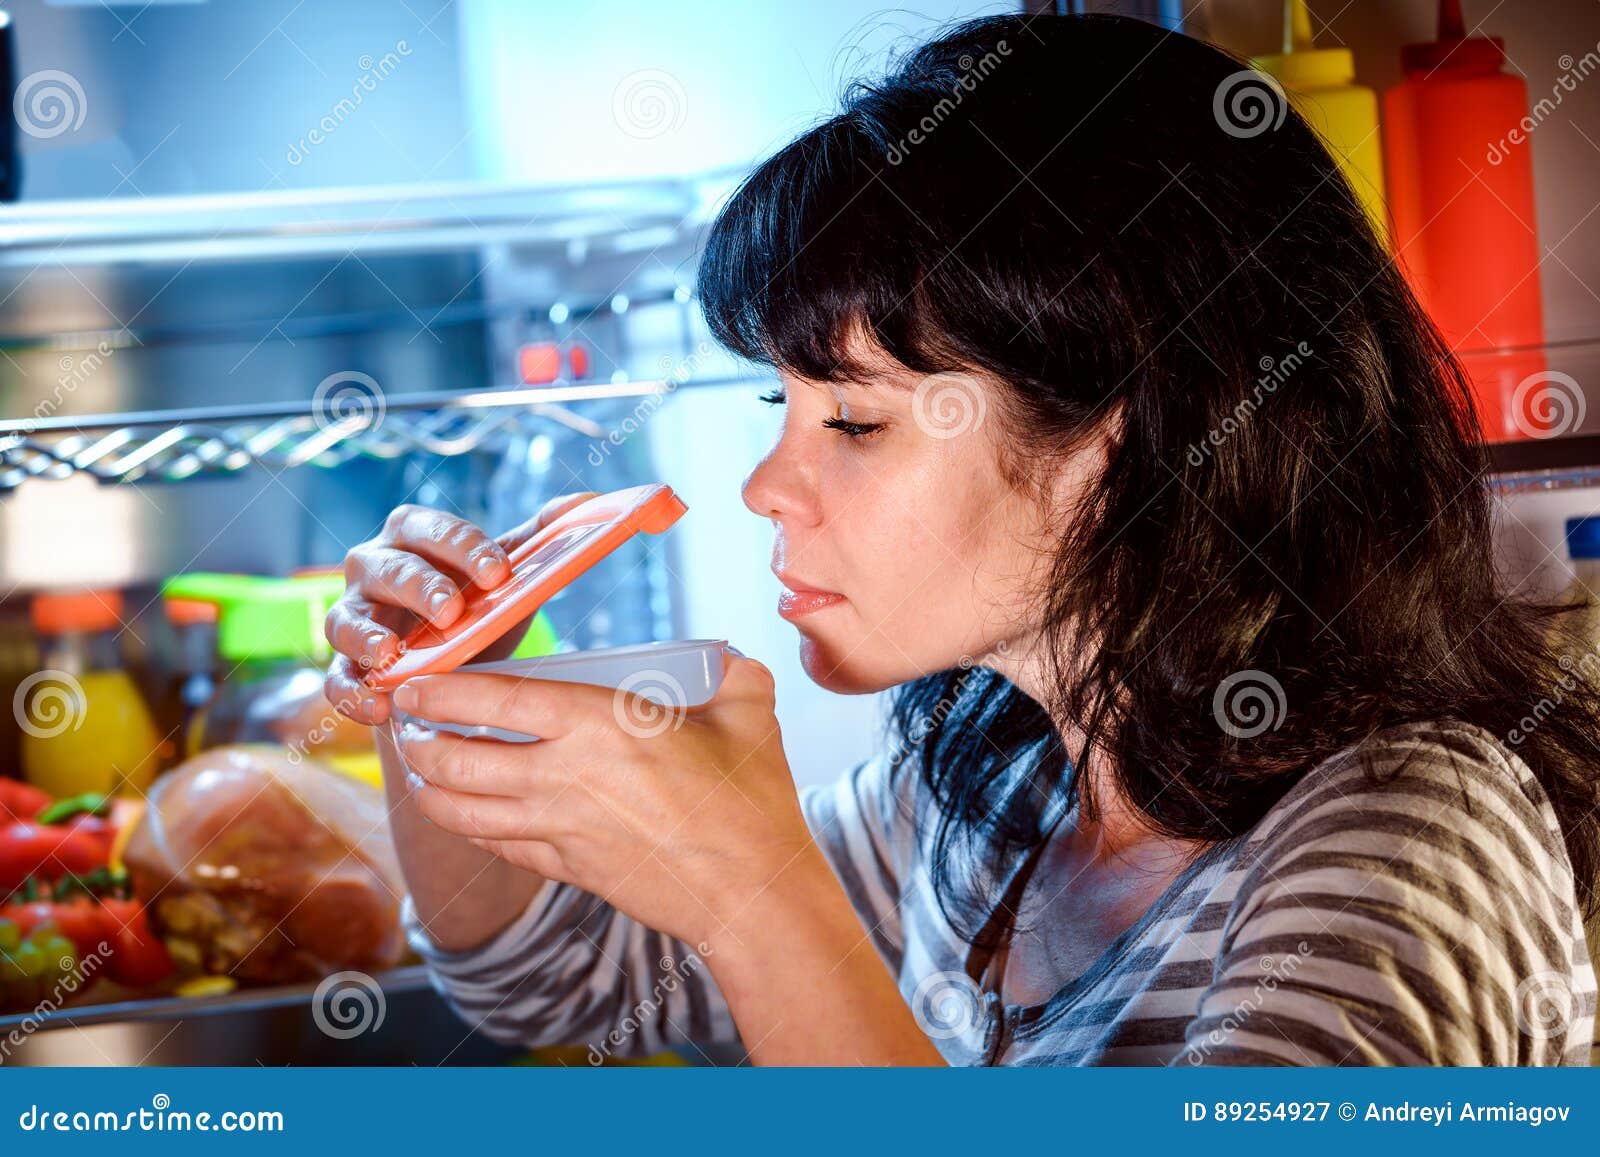 woman opened the refrigerator and sniffs a container of food